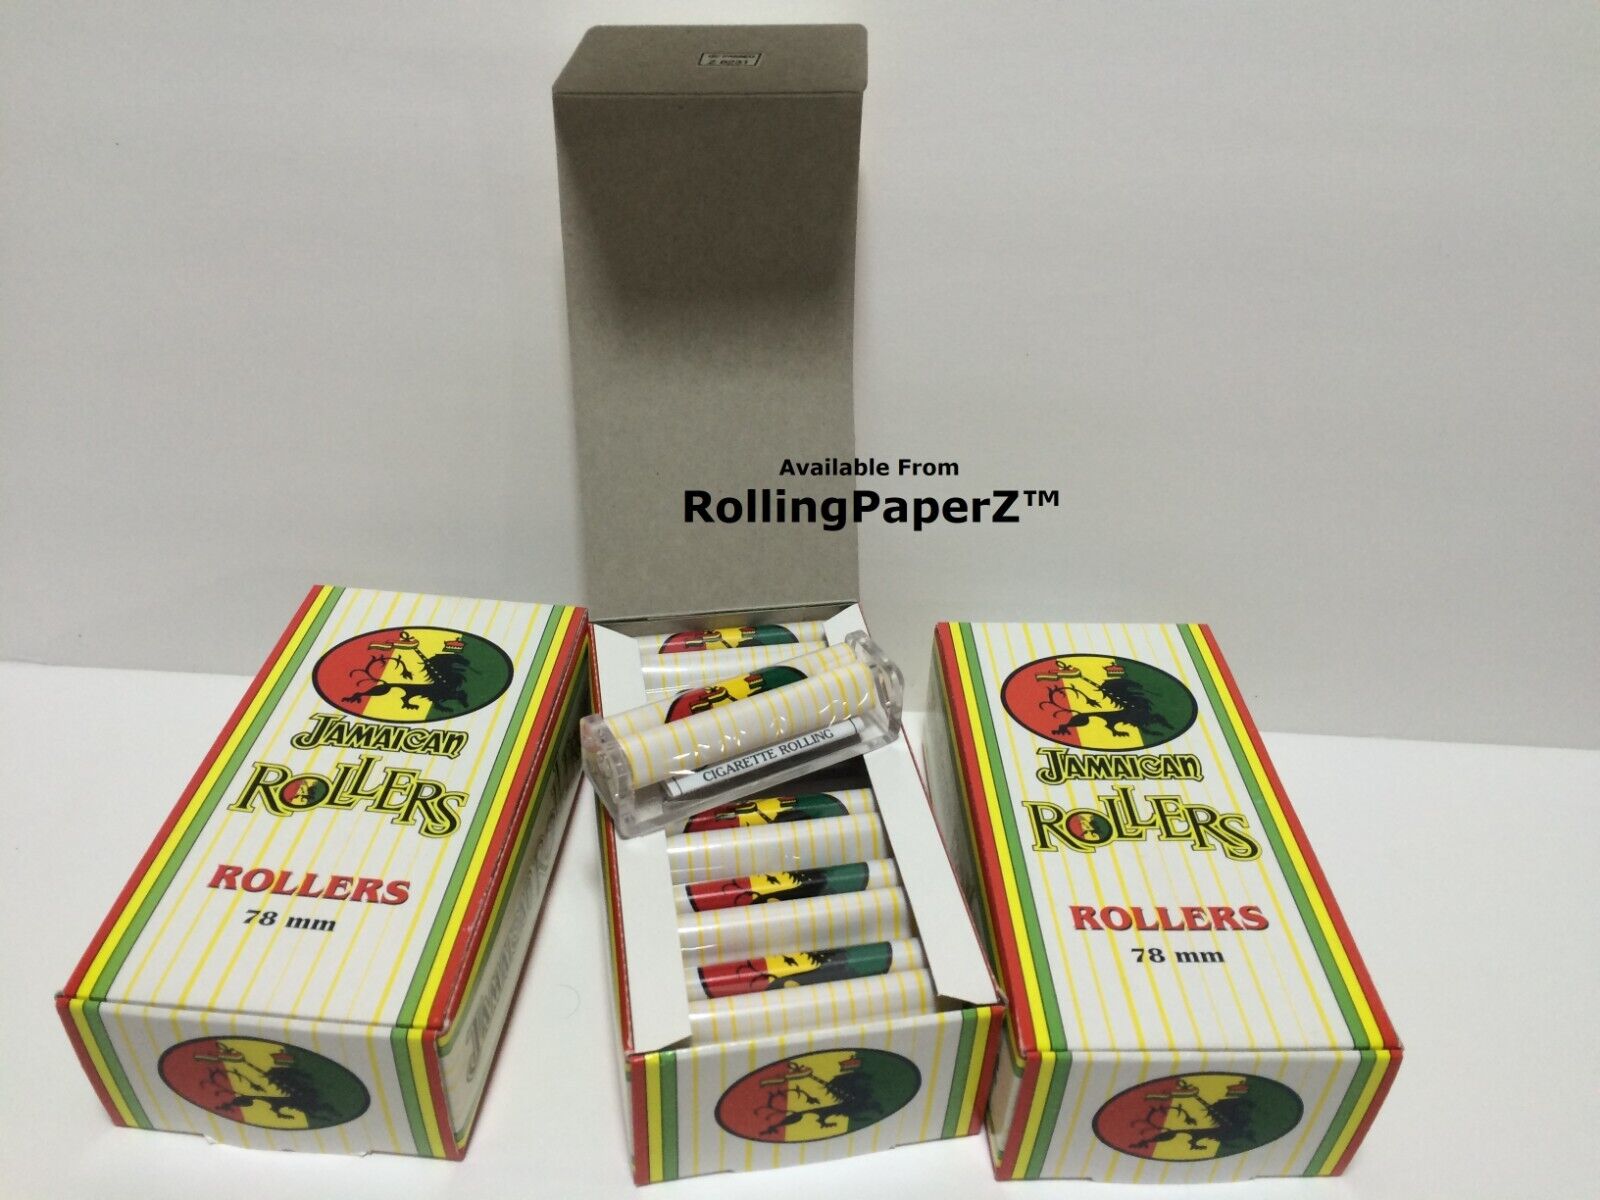 BUY THREE of 12 COUNT BOX COUNTER TOP DISPLAYS - JAMAICAN ROLLING MACHINES 78MM